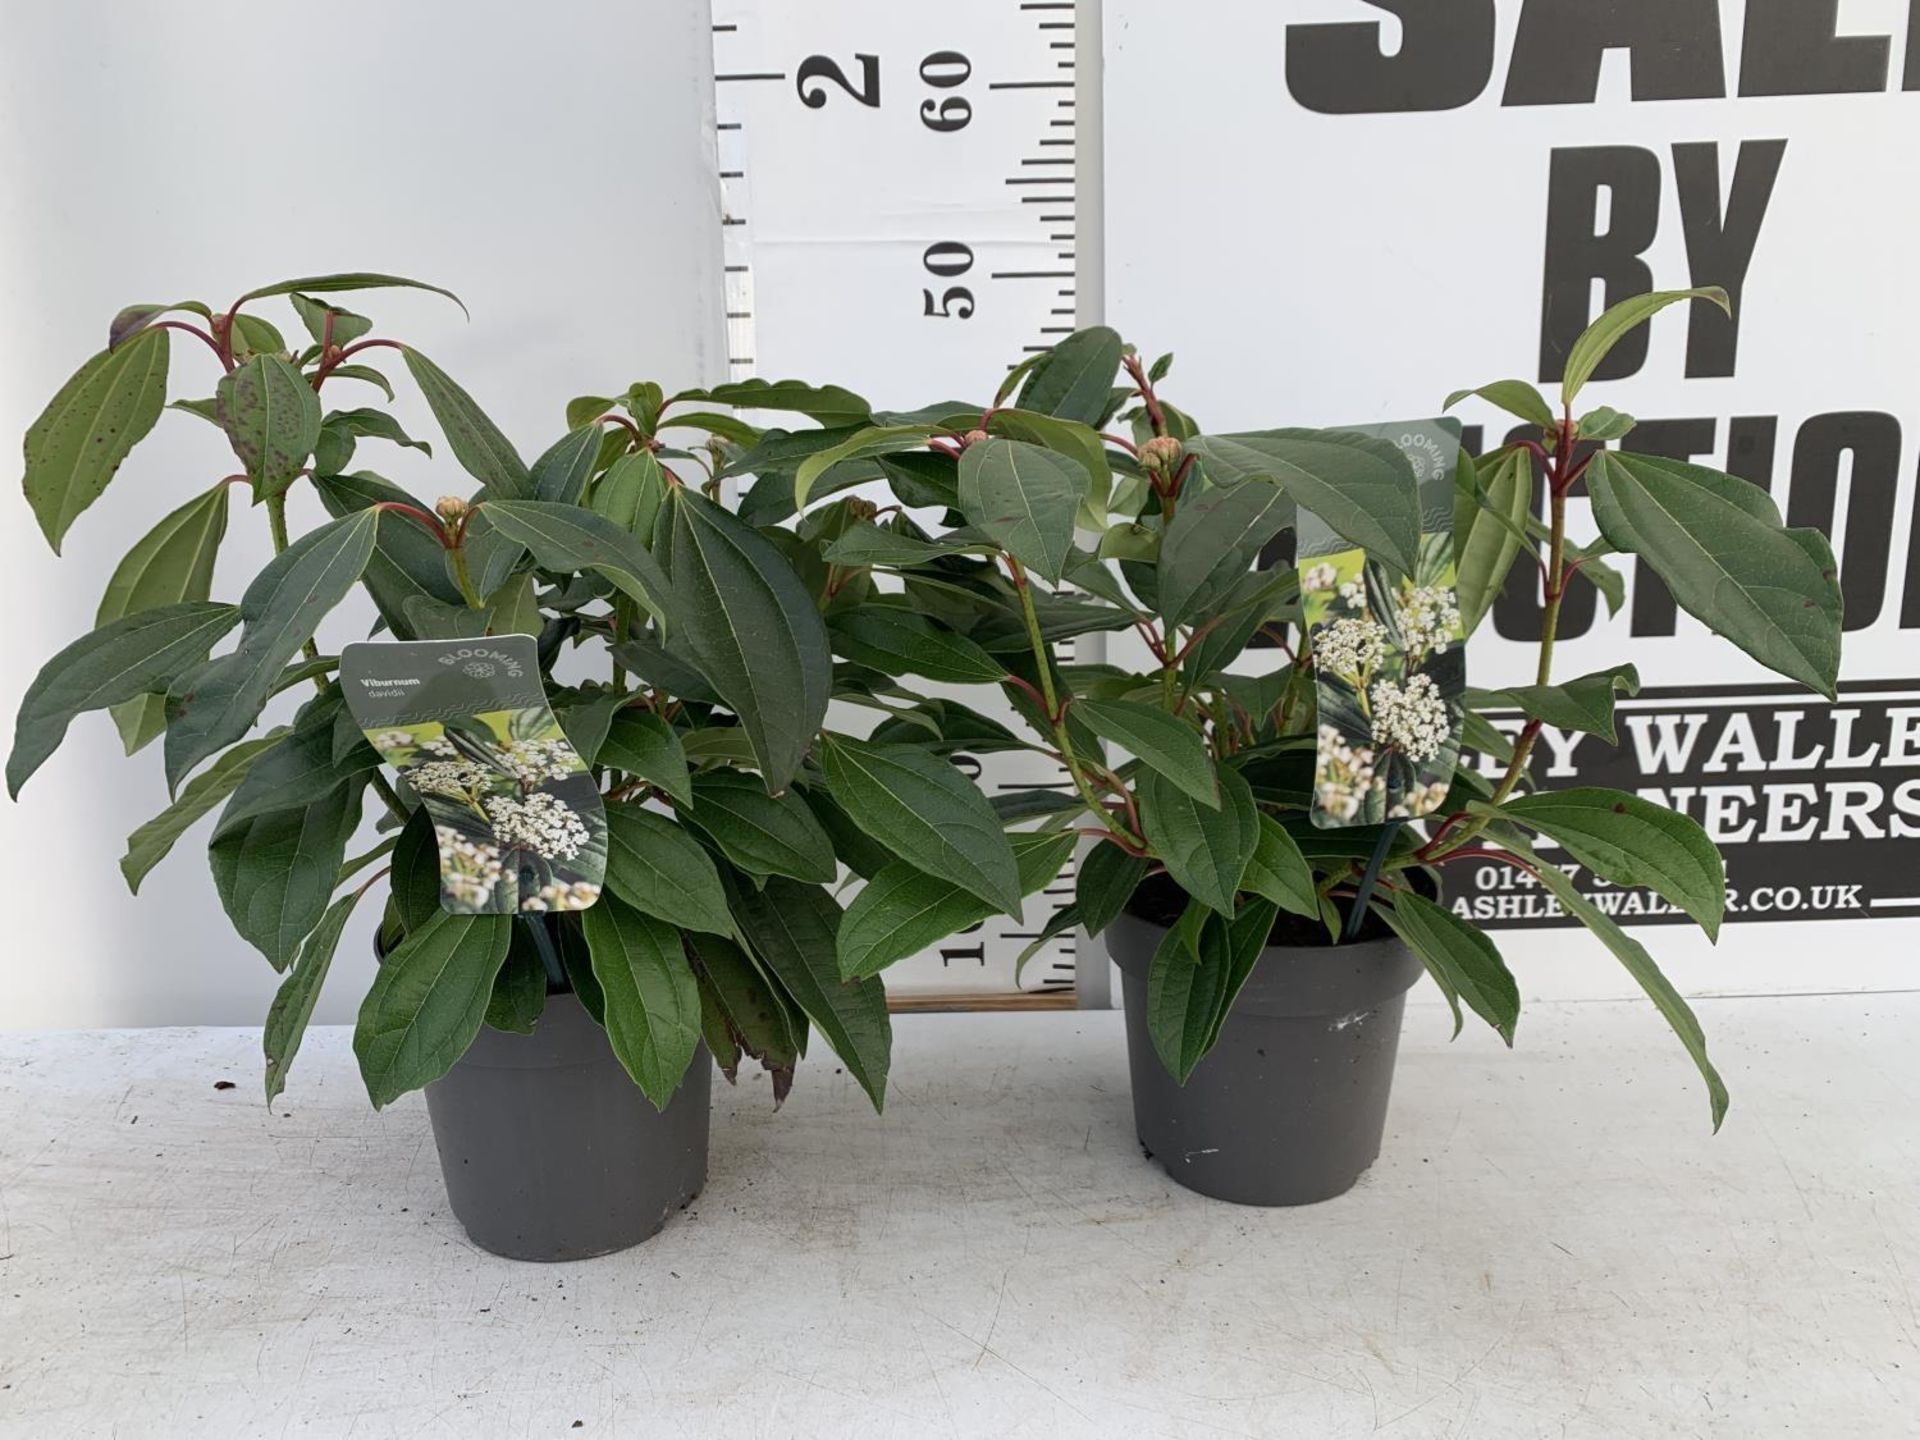 TWO VIBURNUM 'DAVIDII' IN 2LTR POTS APPROX 40CM IN HEIGHT TO BE SOLD FOR THE TWO PLUS VAT - Image 2 of 8